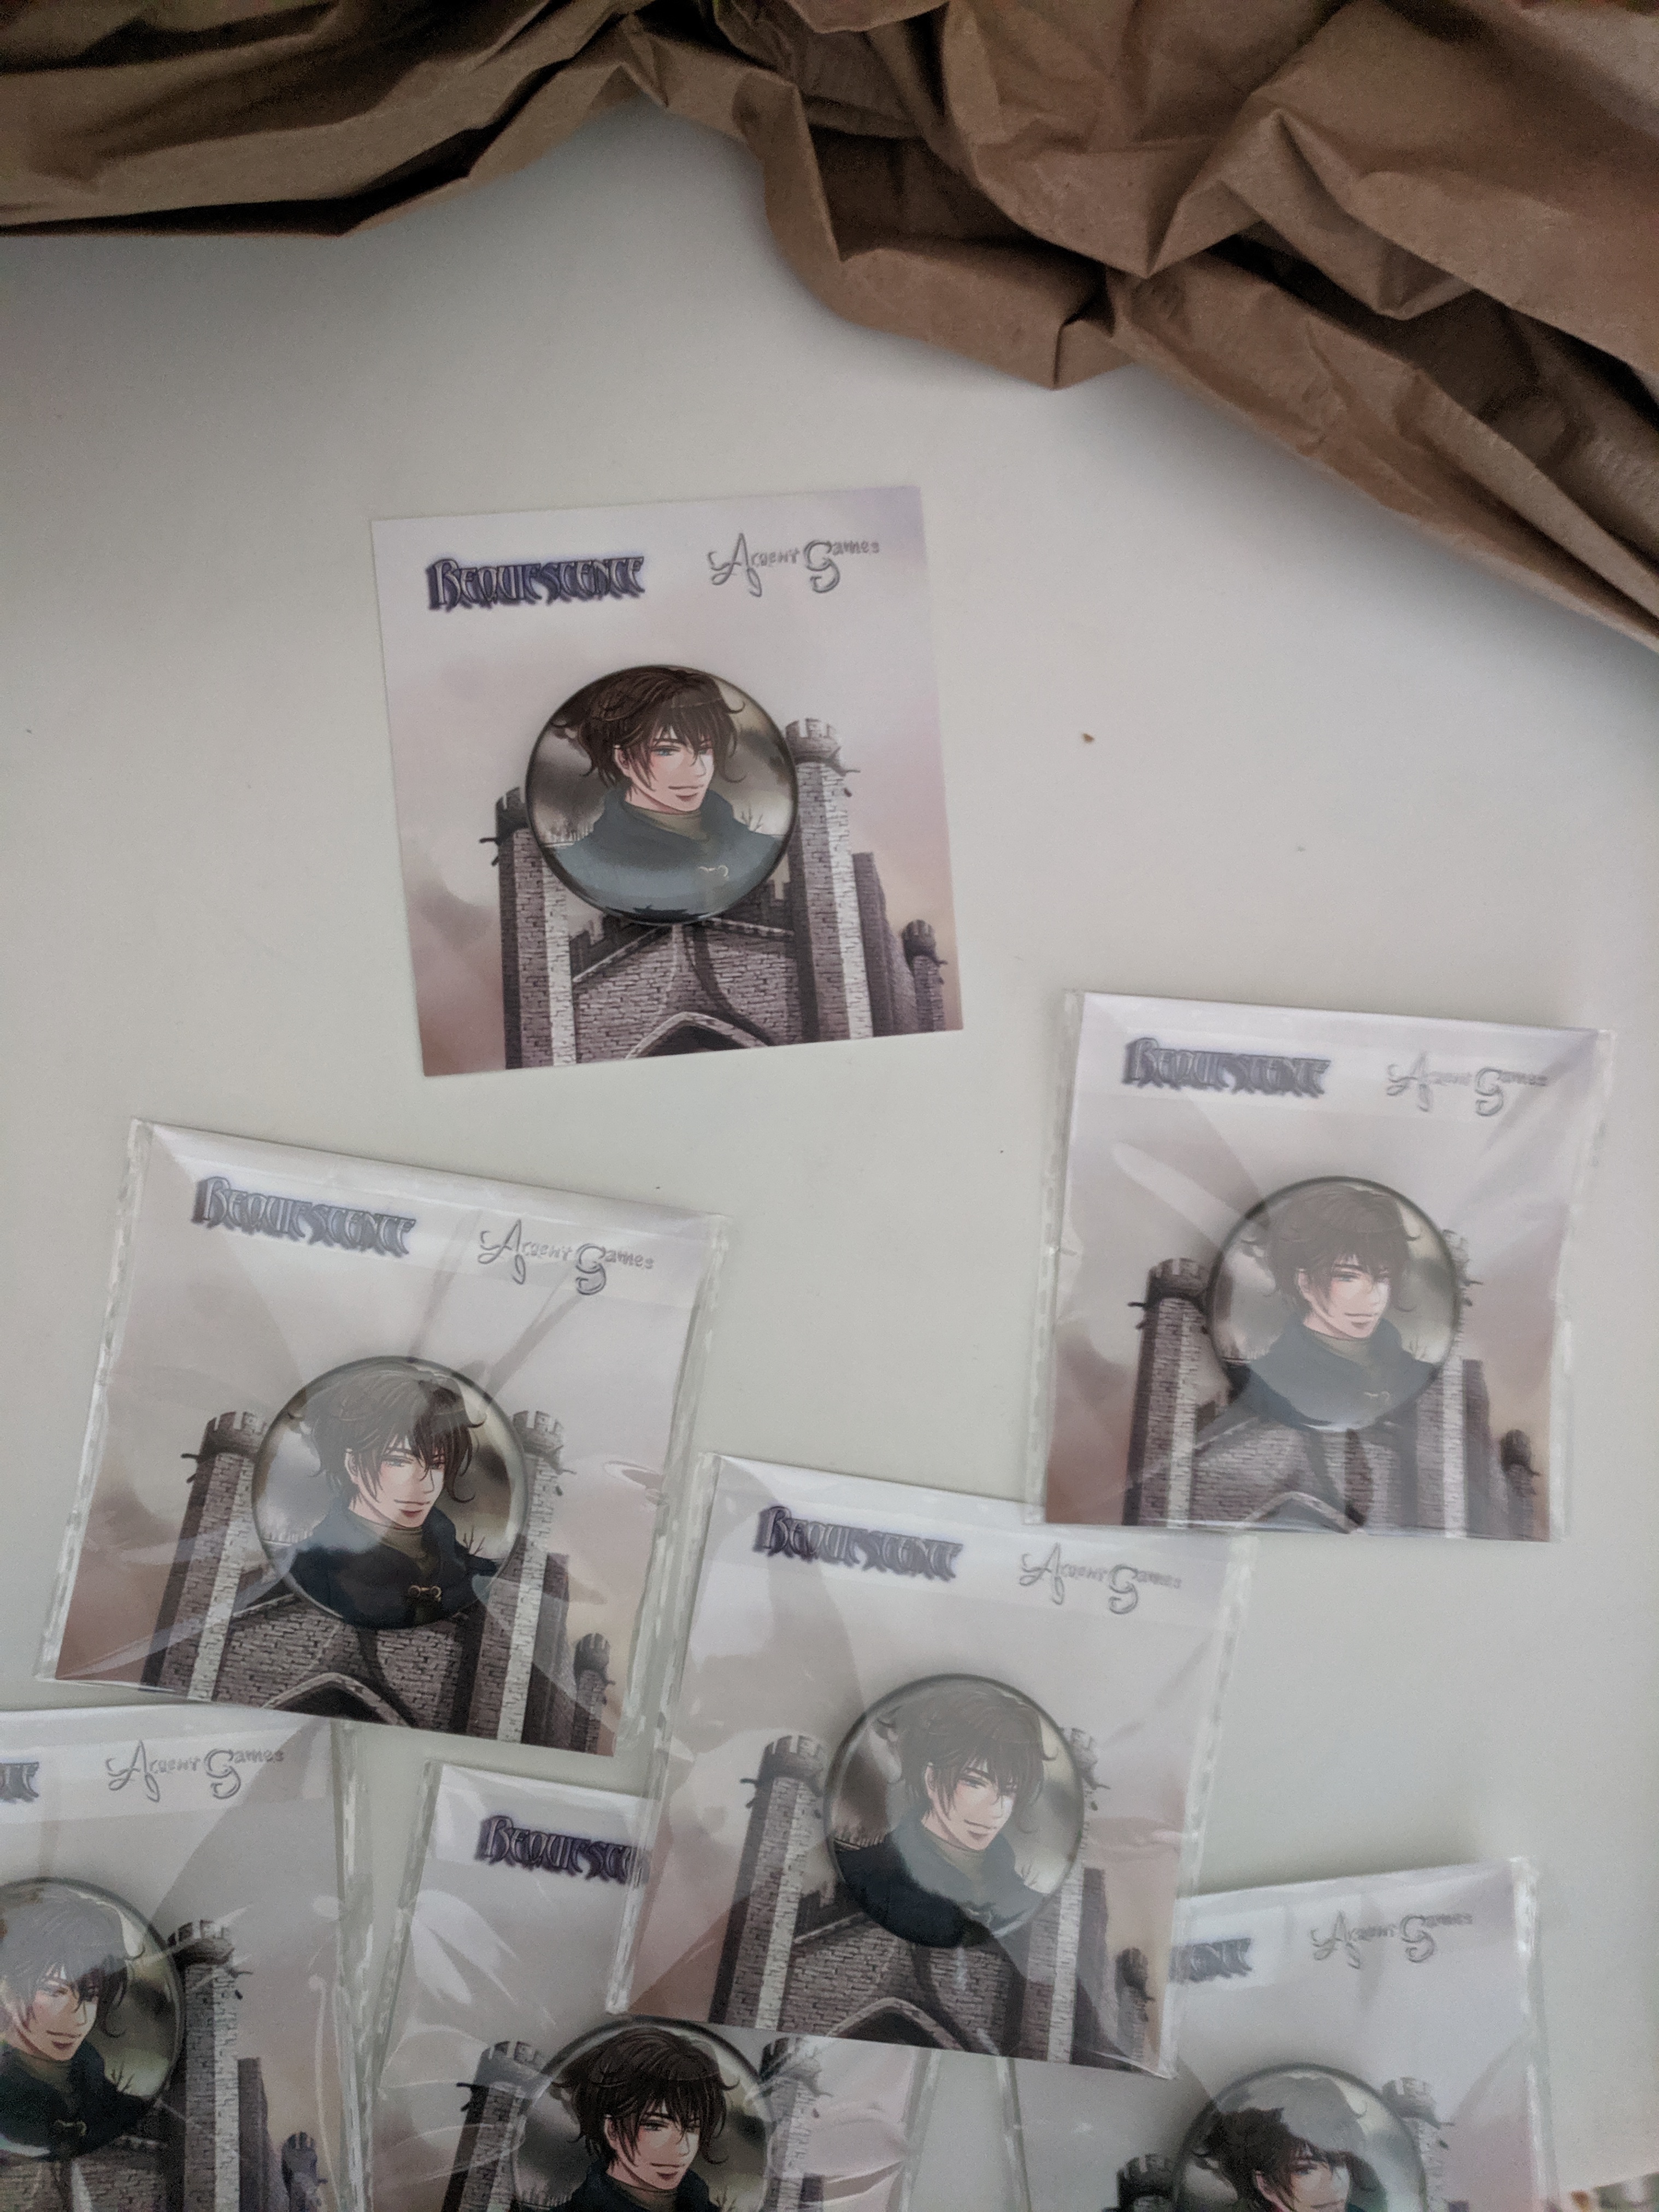 Some Kymil buttons packaged up